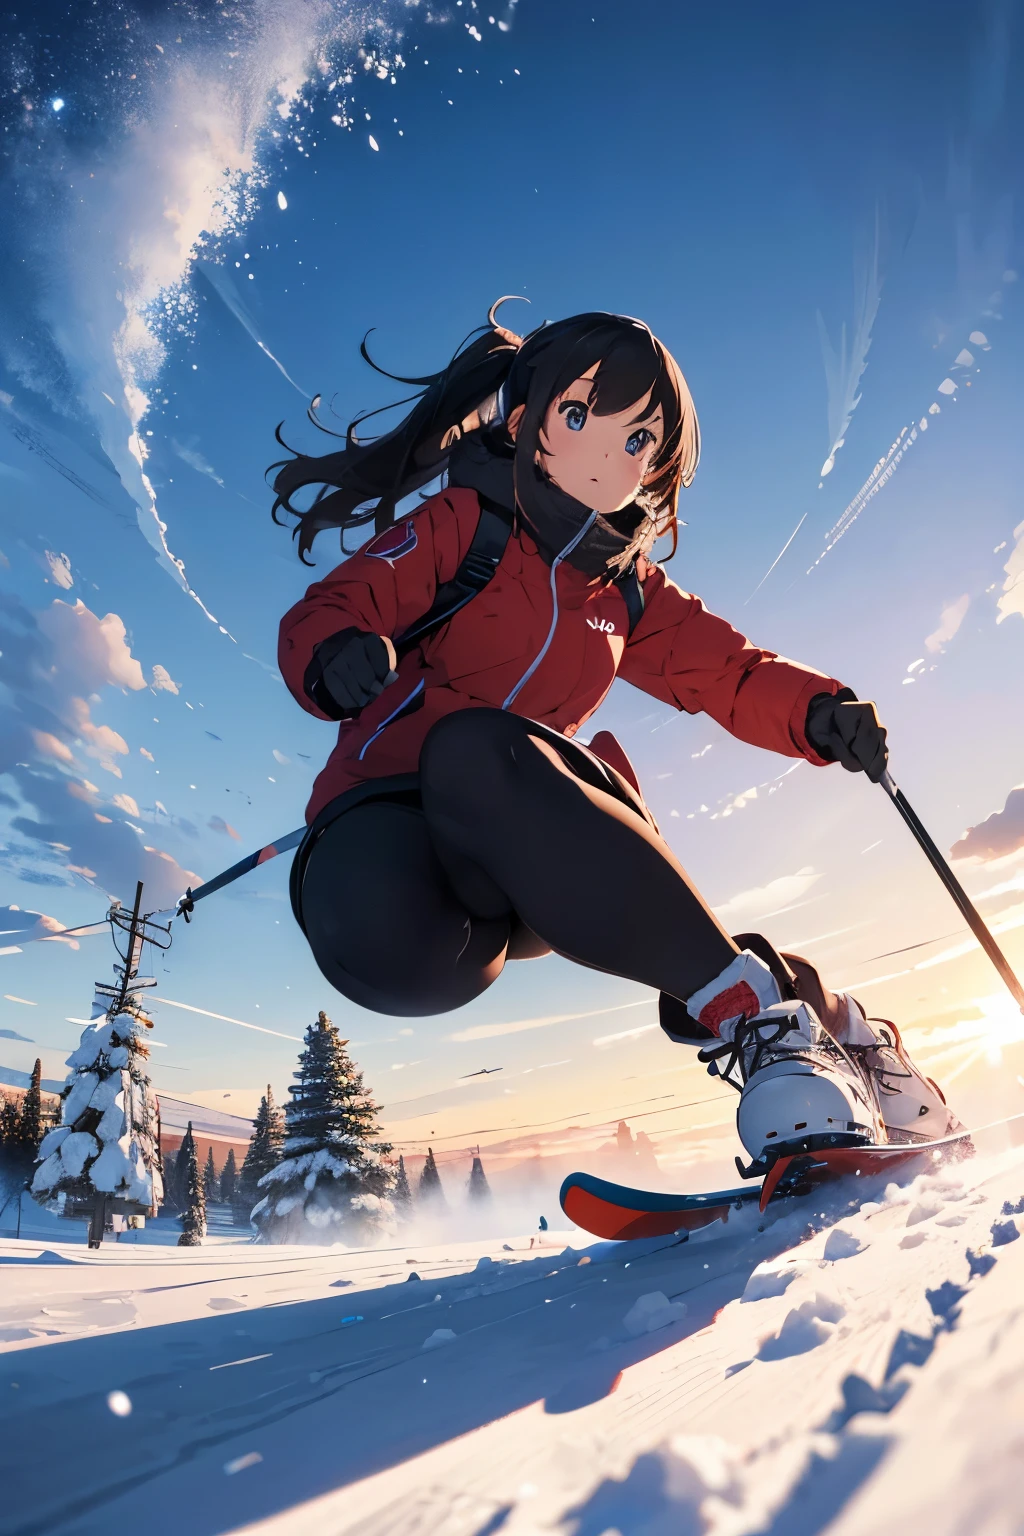 1 girl，(skiing, sled, snow explosion),Raw edge red down jacket， action  shot, vivd colour，rays of sunshine, wide angles,Perfect action， (end:1.3) 8K, F2.8, RAW photogr, ultra - detailed, reallife，bokeh，32K，